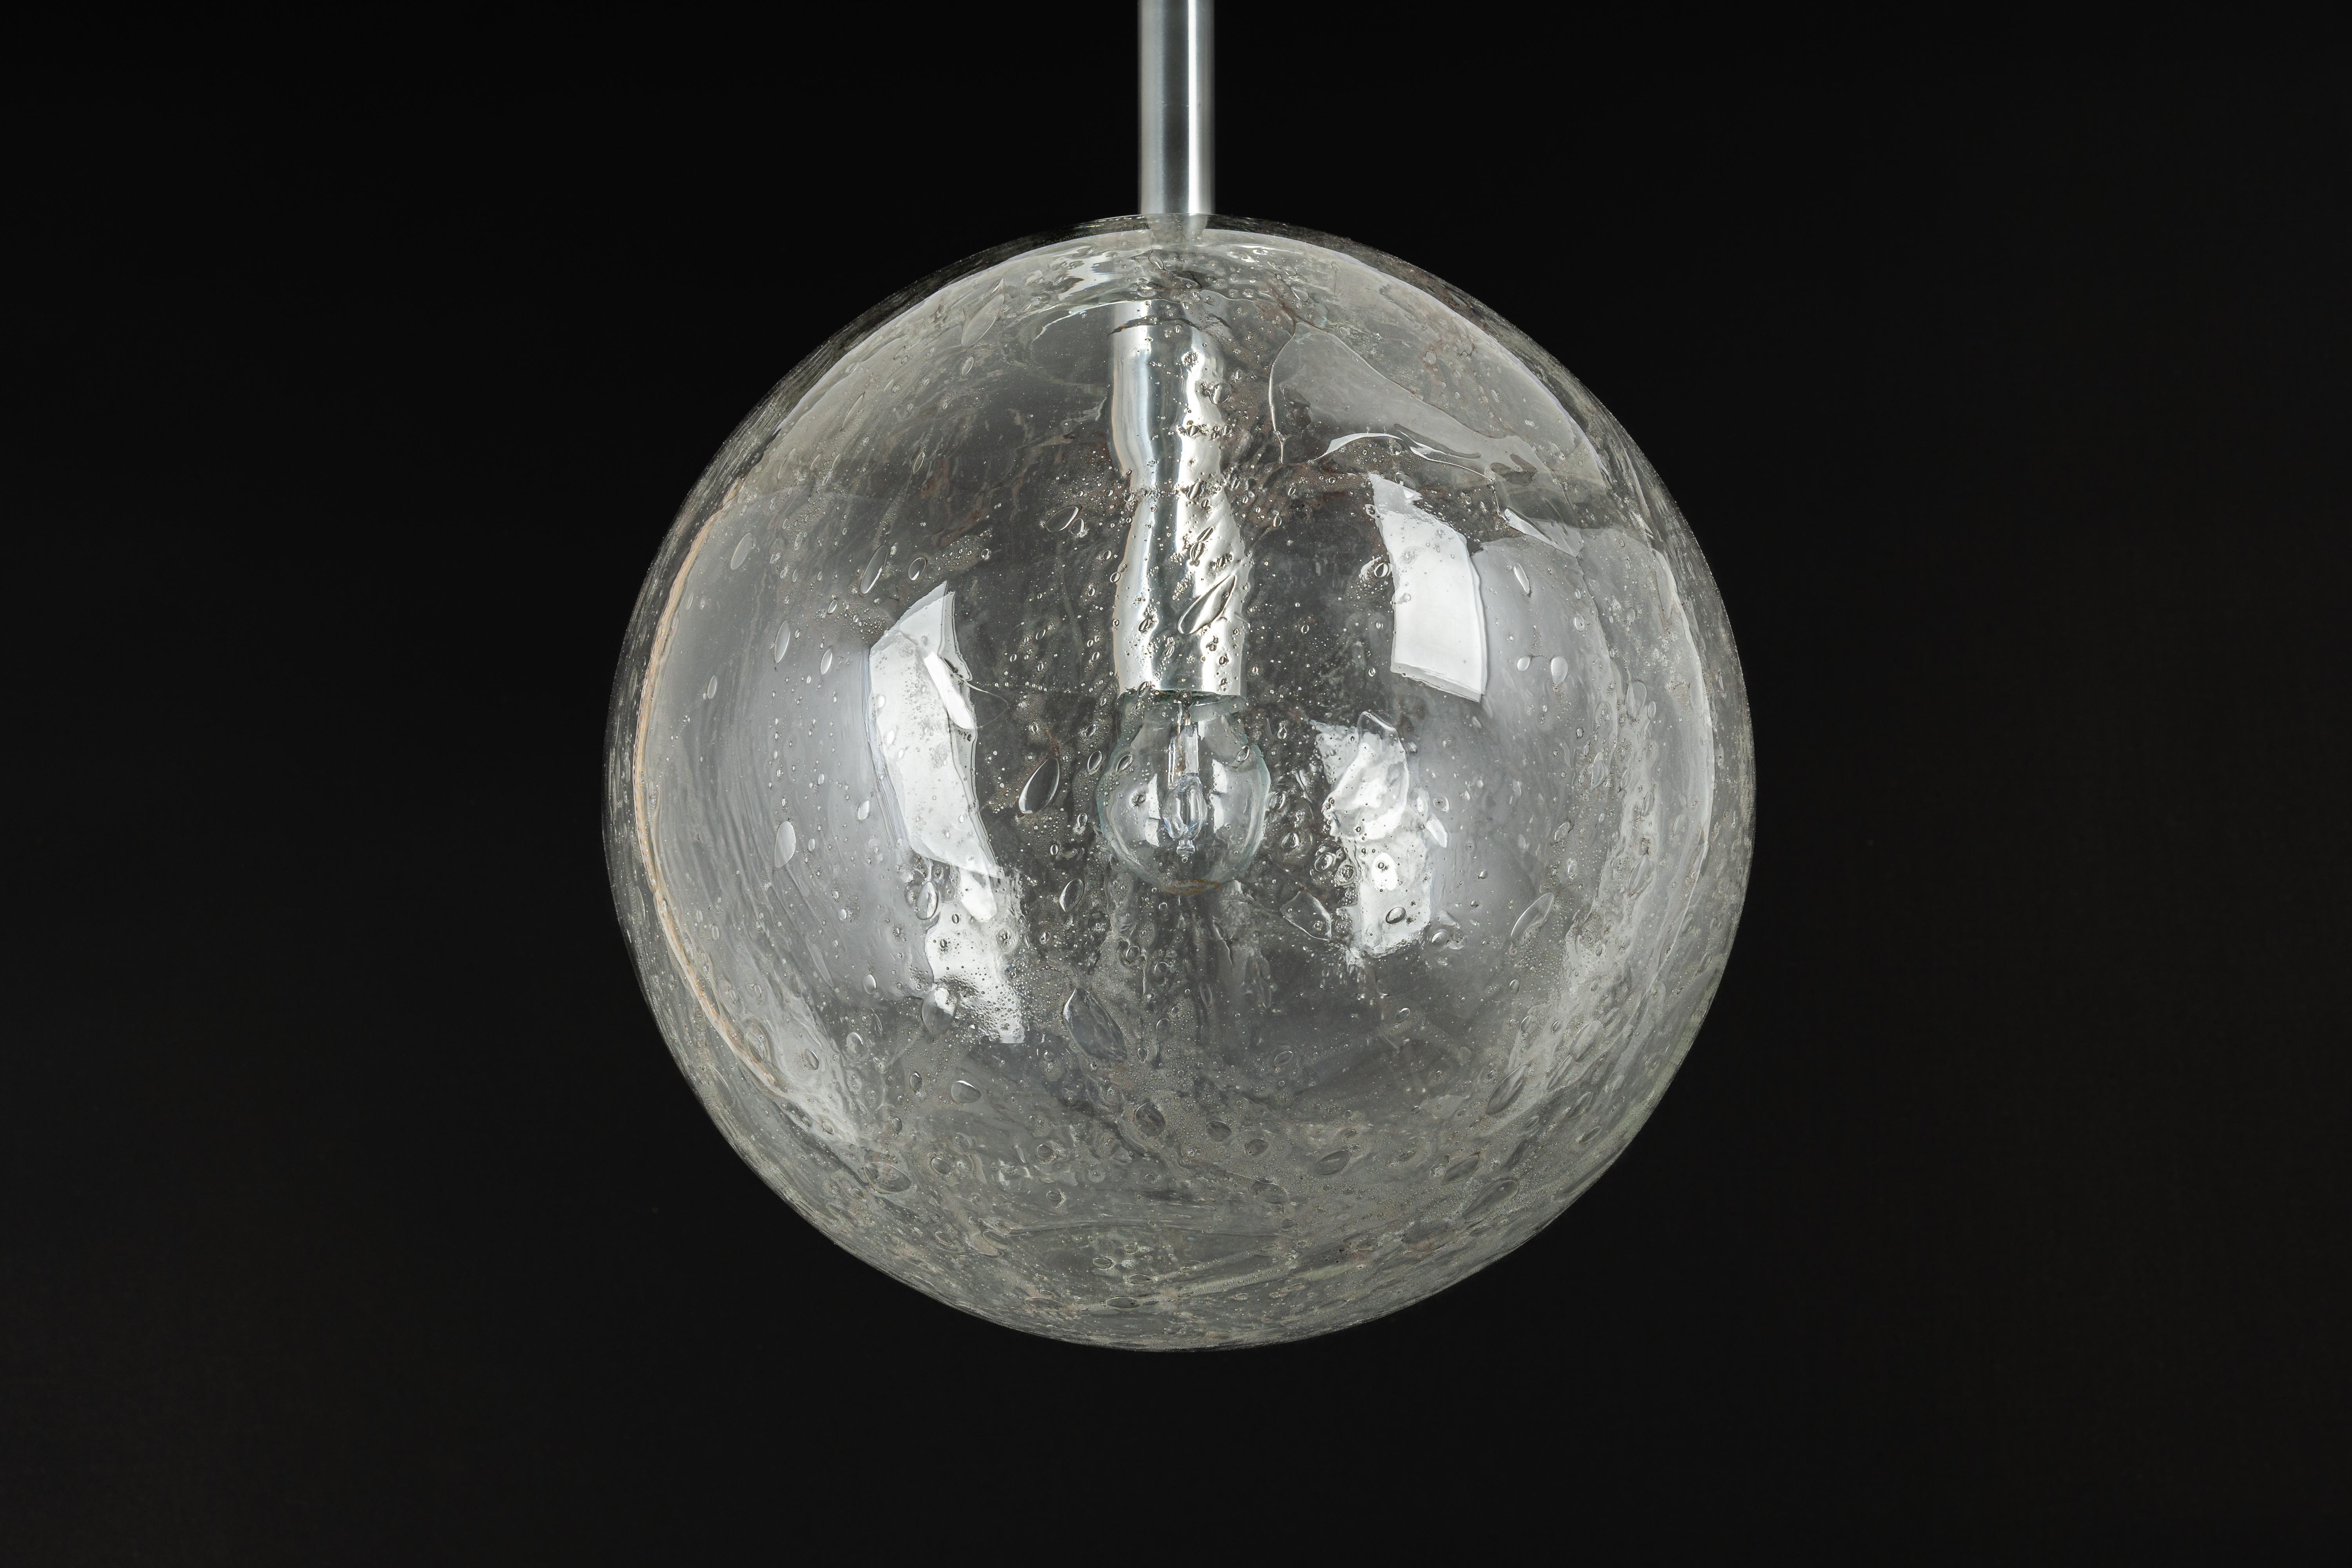 Doria ceiling light with nice Murano glass ball.
High quality of materials, gives a wonderful light effect when it is on.
Very good condition. Cleaned, well-wired, and ready to use. 
The fixture requires one standard bulb (E-27)
Light bulbs are